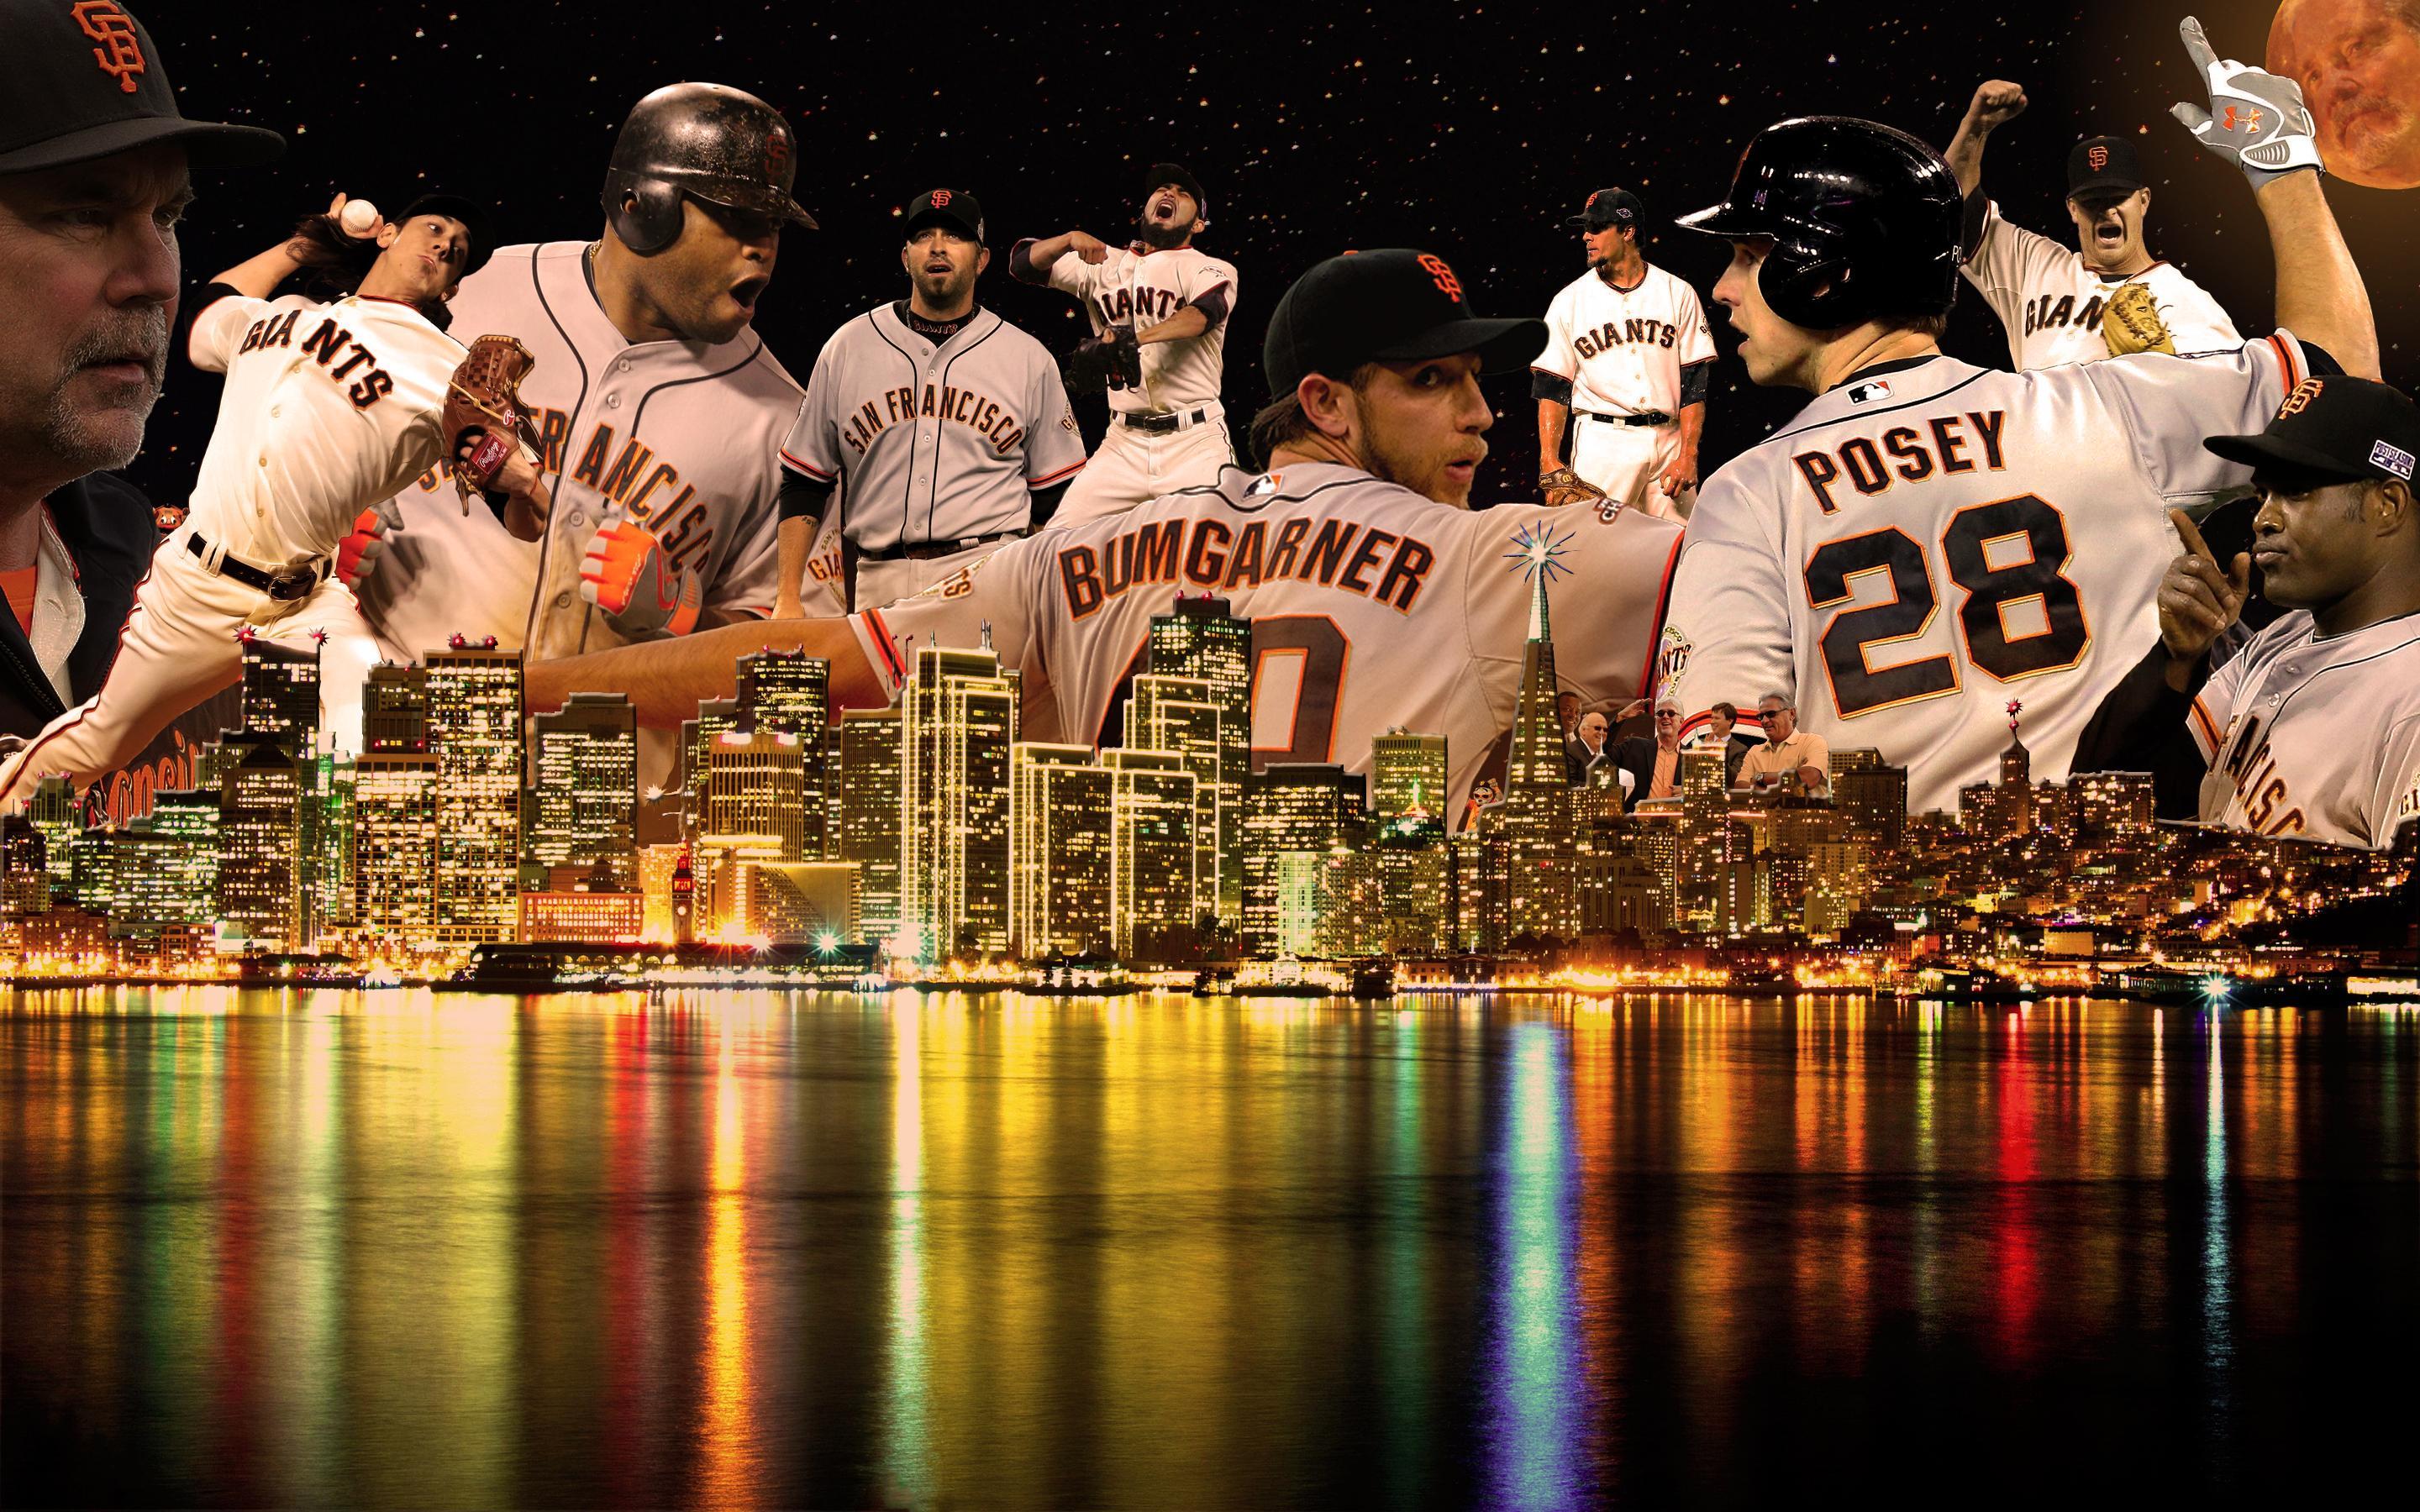 San Francisco Giants Wallpaper image in Collection